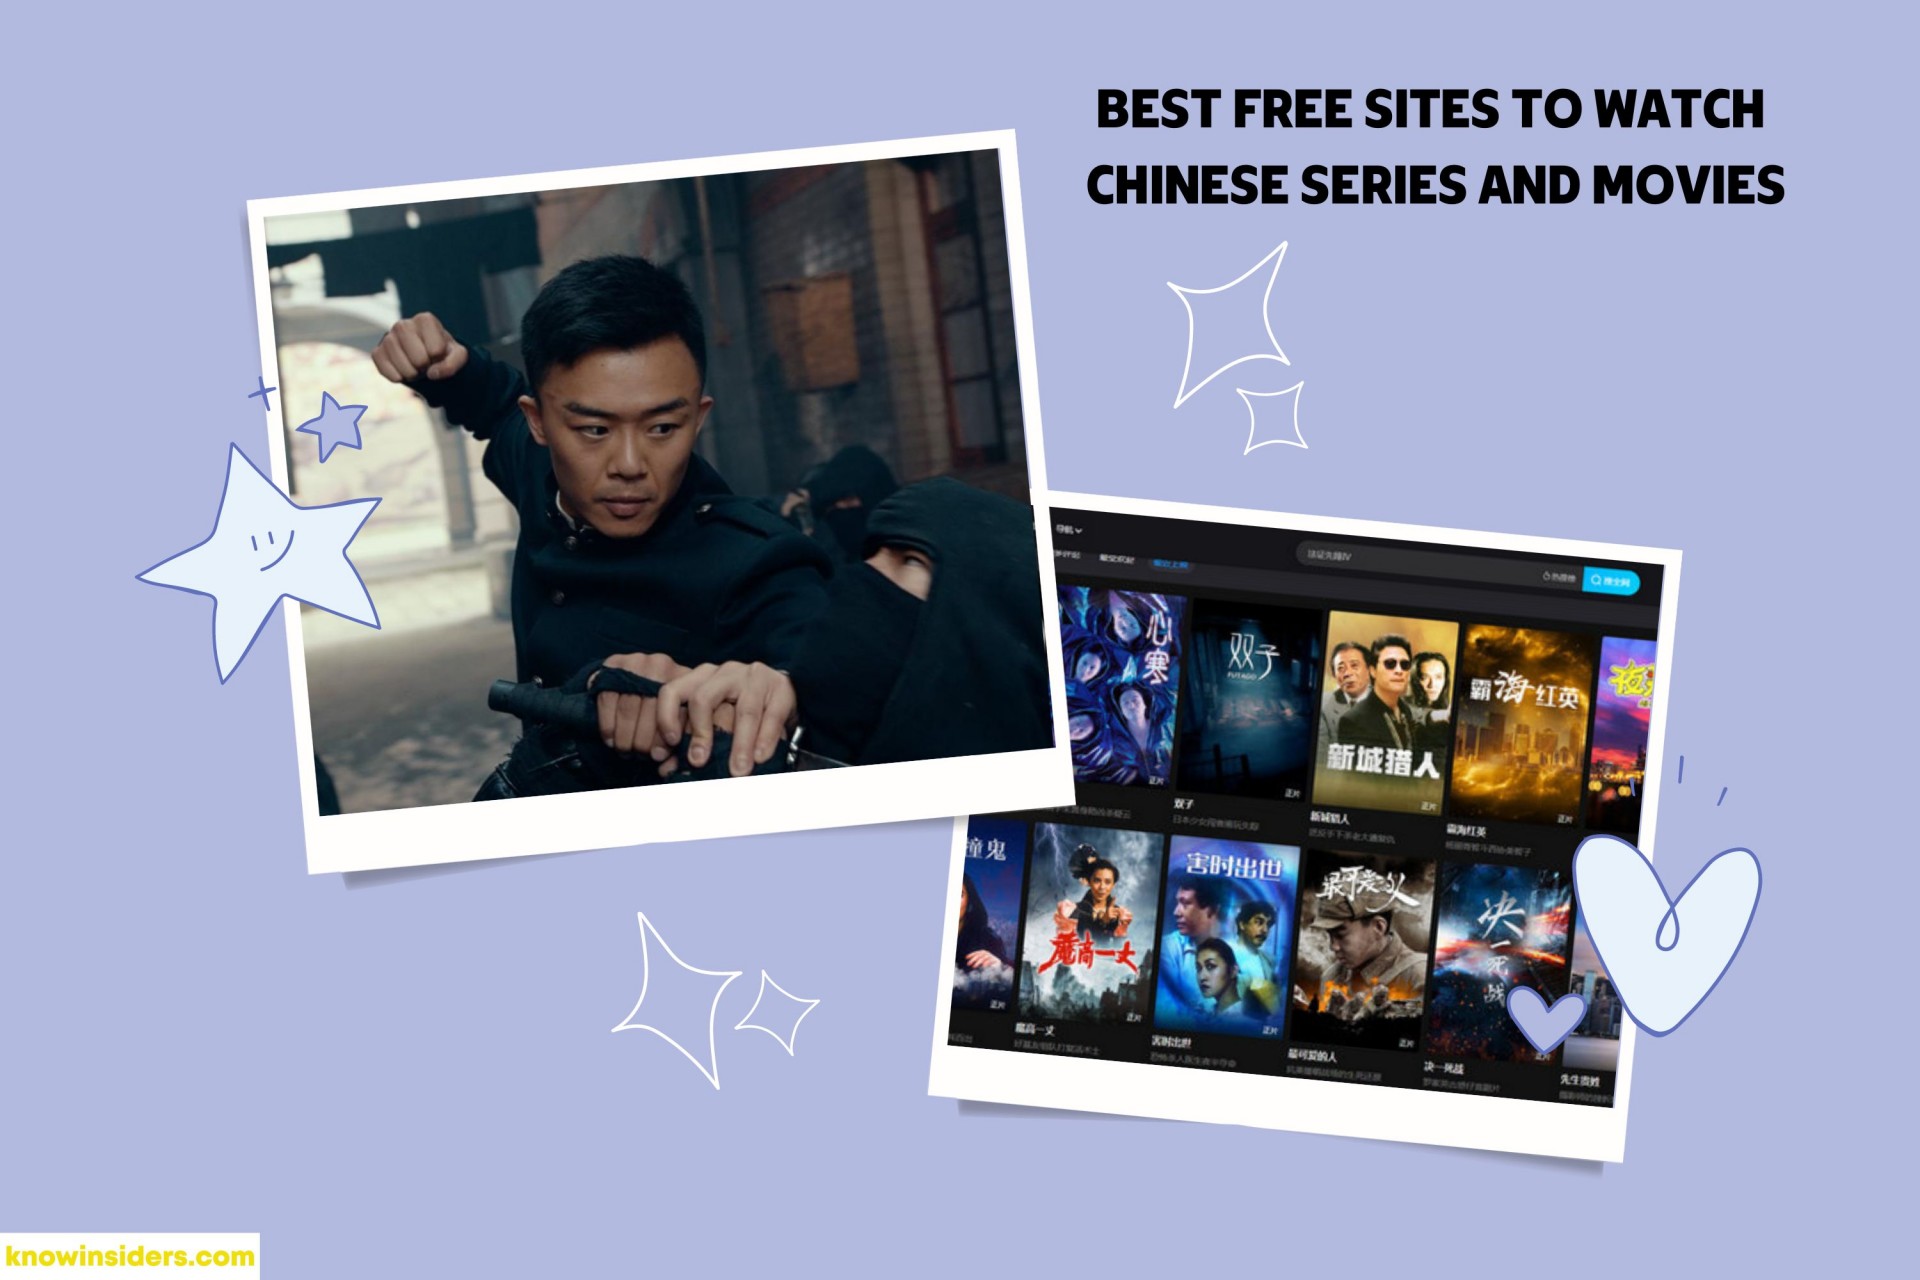 Top 10+ Free Sites To Watch Chinese Series and Movies (Legally)